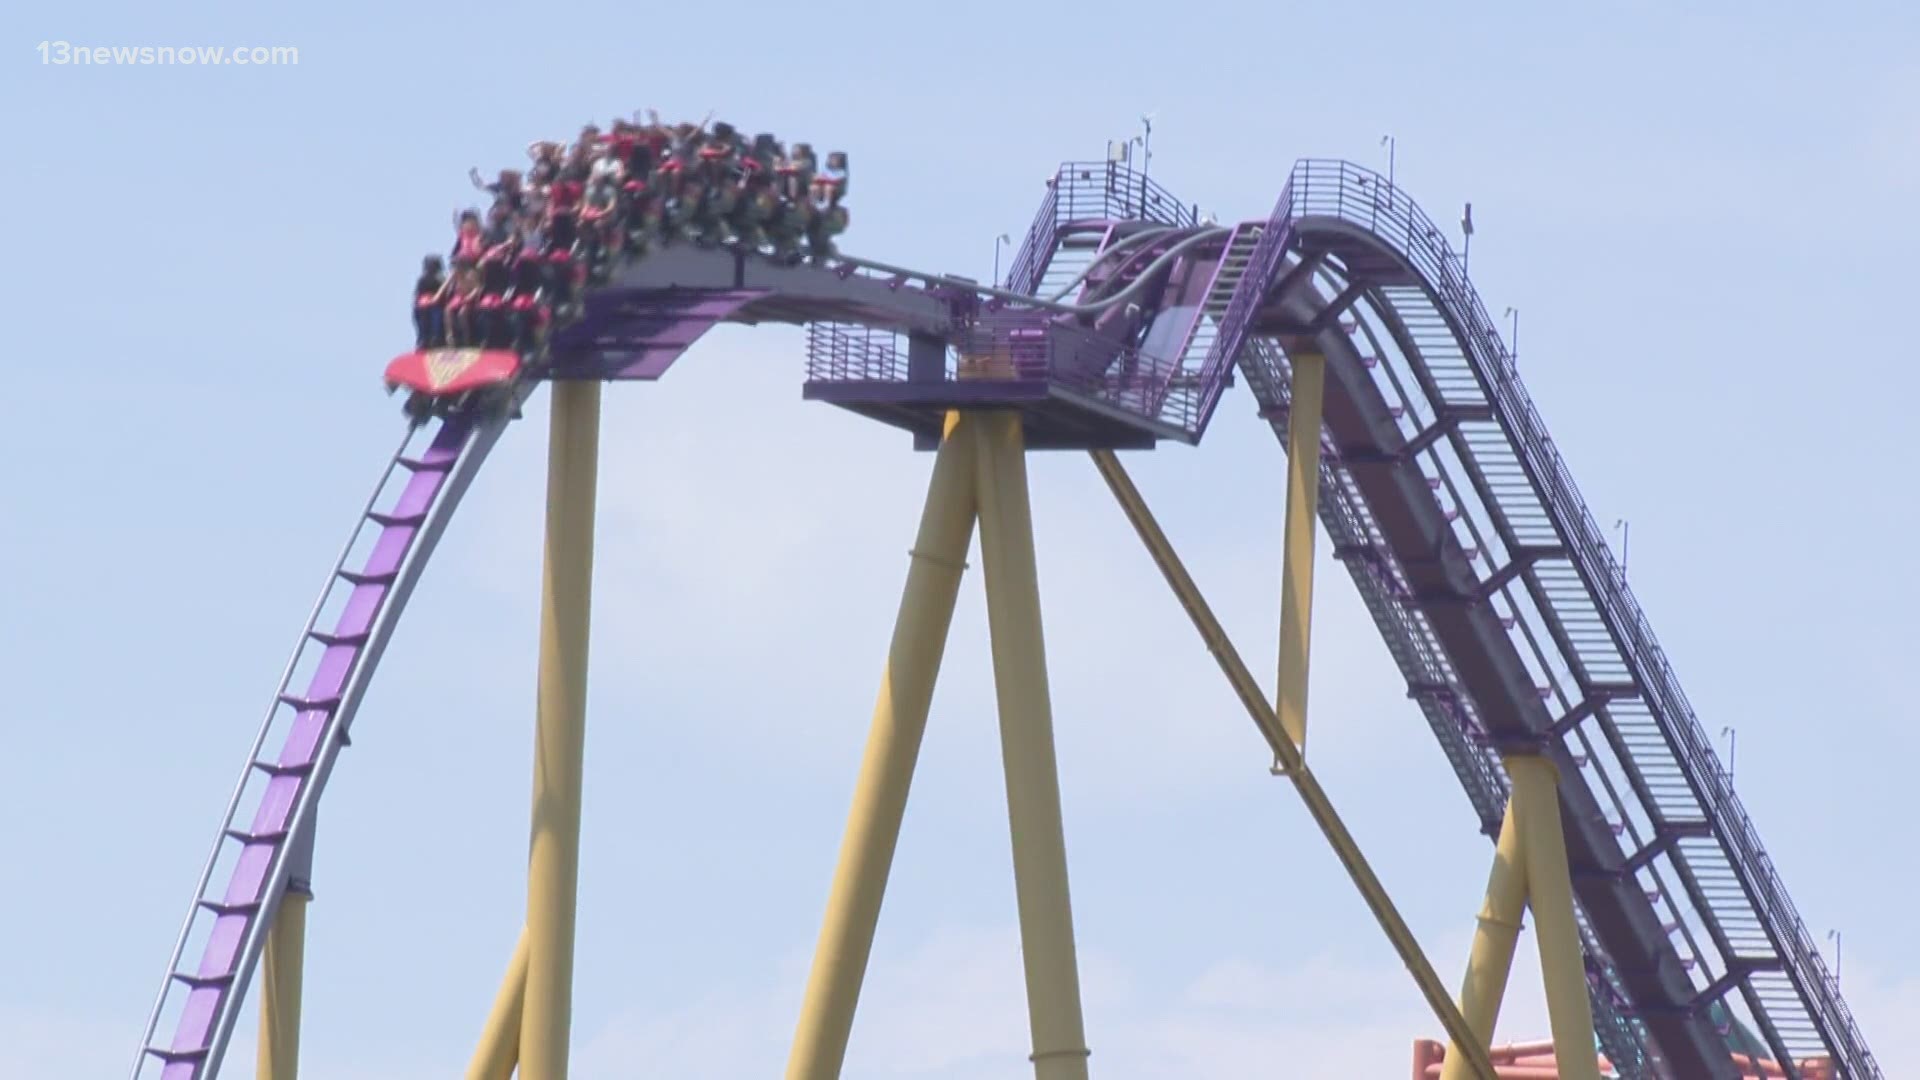 Roller coasters and a rabid fox: that's what one family got during a recent trip to Busch Gardens Williamsburg.